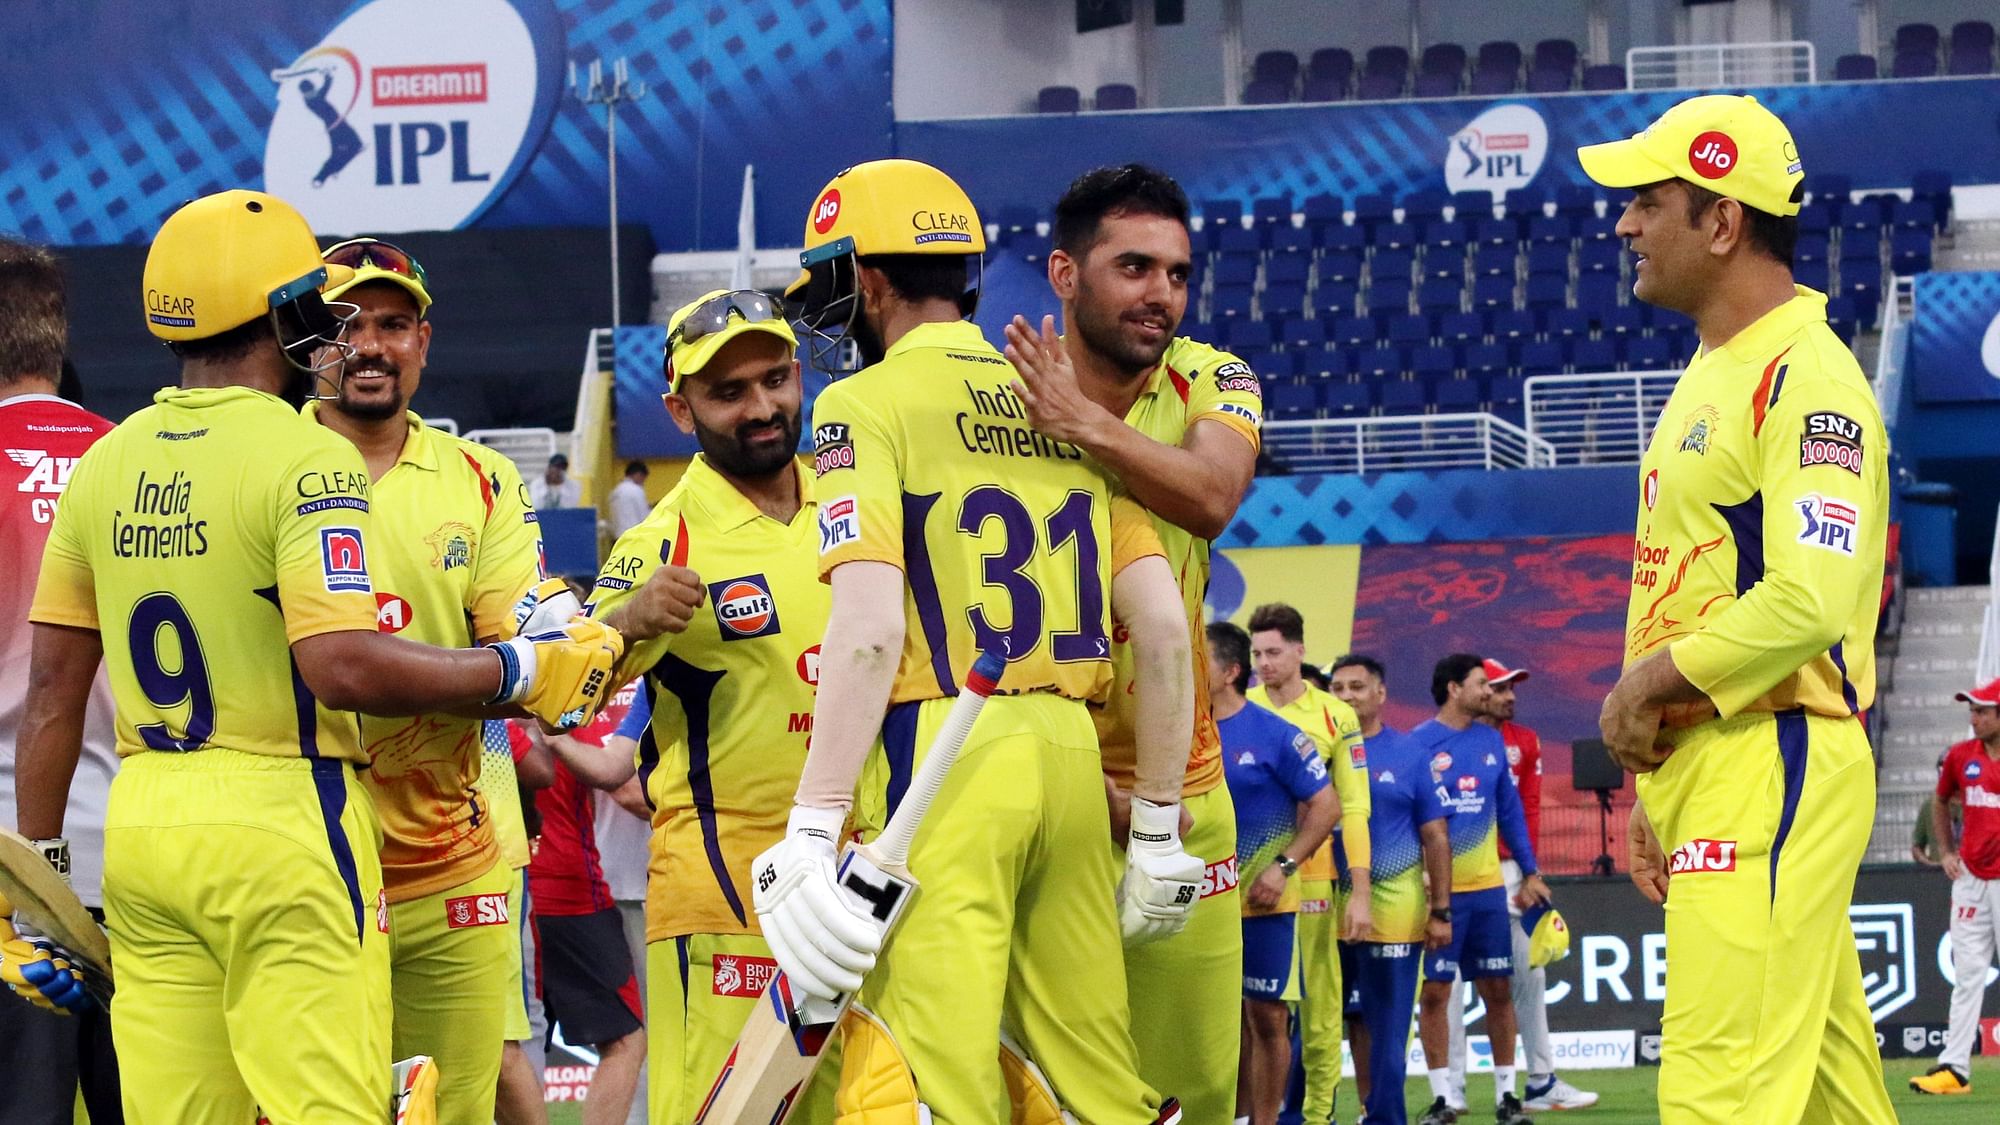 Chennai Super Kings bowed out of the IPL 2020 with a win against Kings XI Punjab